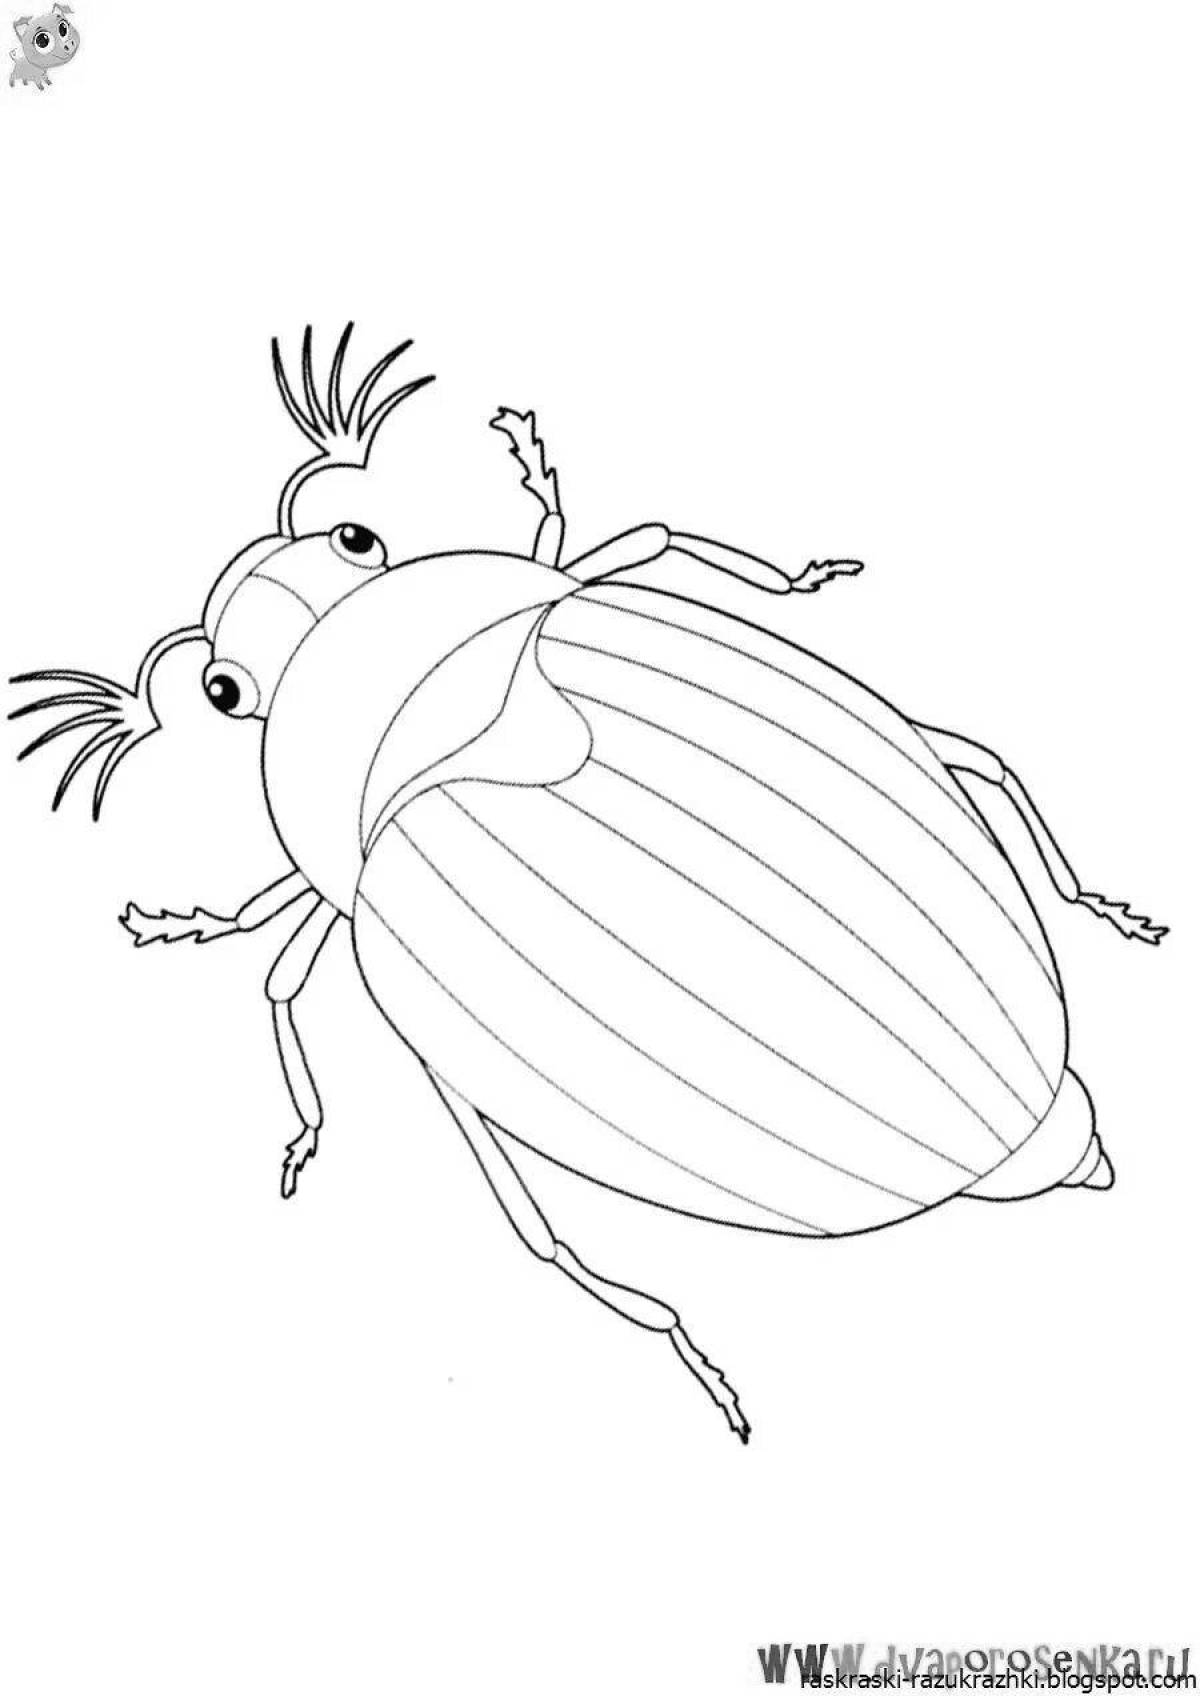 Outstanding beetle coloring pages for 3-4 year olds